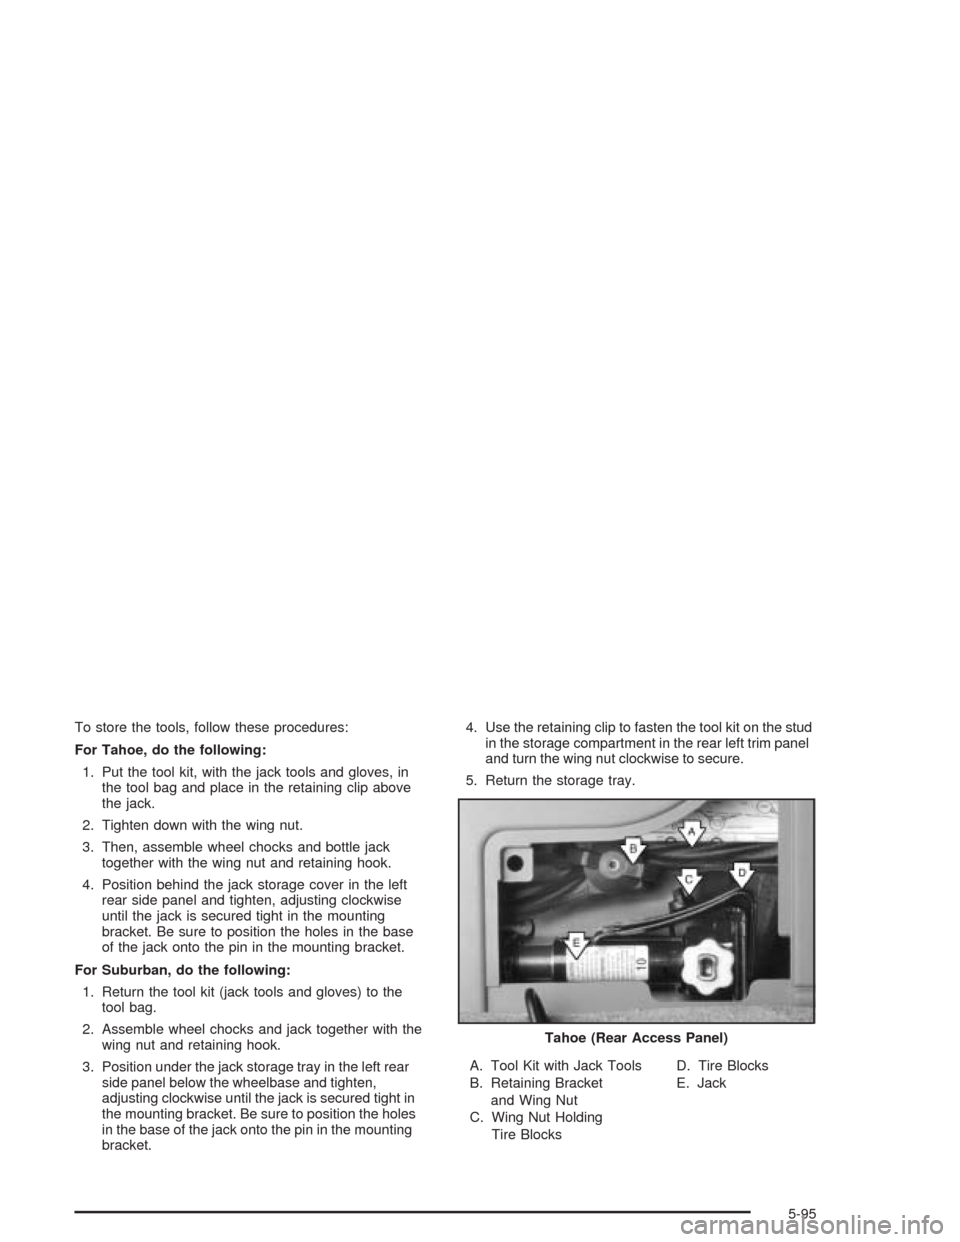 CHEVROLET TAHOE 2004 2.G Owners Manual To store the tools, follow these procedures:
For Tahoe, do the following:
1. Put the tool kit, with the jack tools and gloves, in
the tool bag and place in the retaining clip above
the jack.
2. Tighte